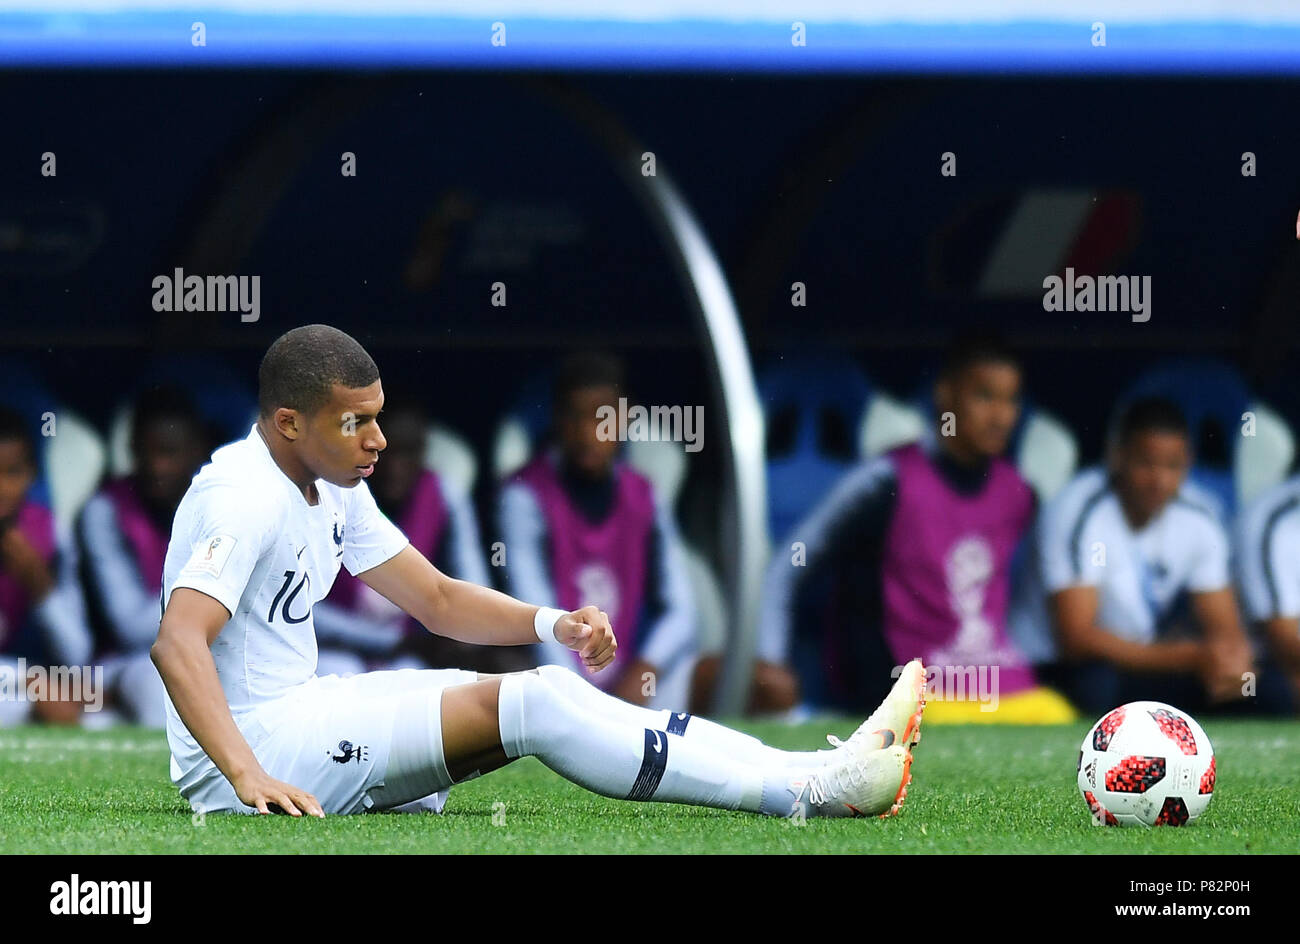 NIZHNY NOVGOROD, RUSSIA - JULY 06: Kylian Mbappe of France reacts during the 2018 FIFA World Cup Russia Quarter Final match between Uruguay and France at Nizhny Novgorod Stadium on July 6, 2018 in Nizhny Novgorod, Russia. (Photo by Lukasz Laskowski/PressFocus/MB Media) Stock Photo